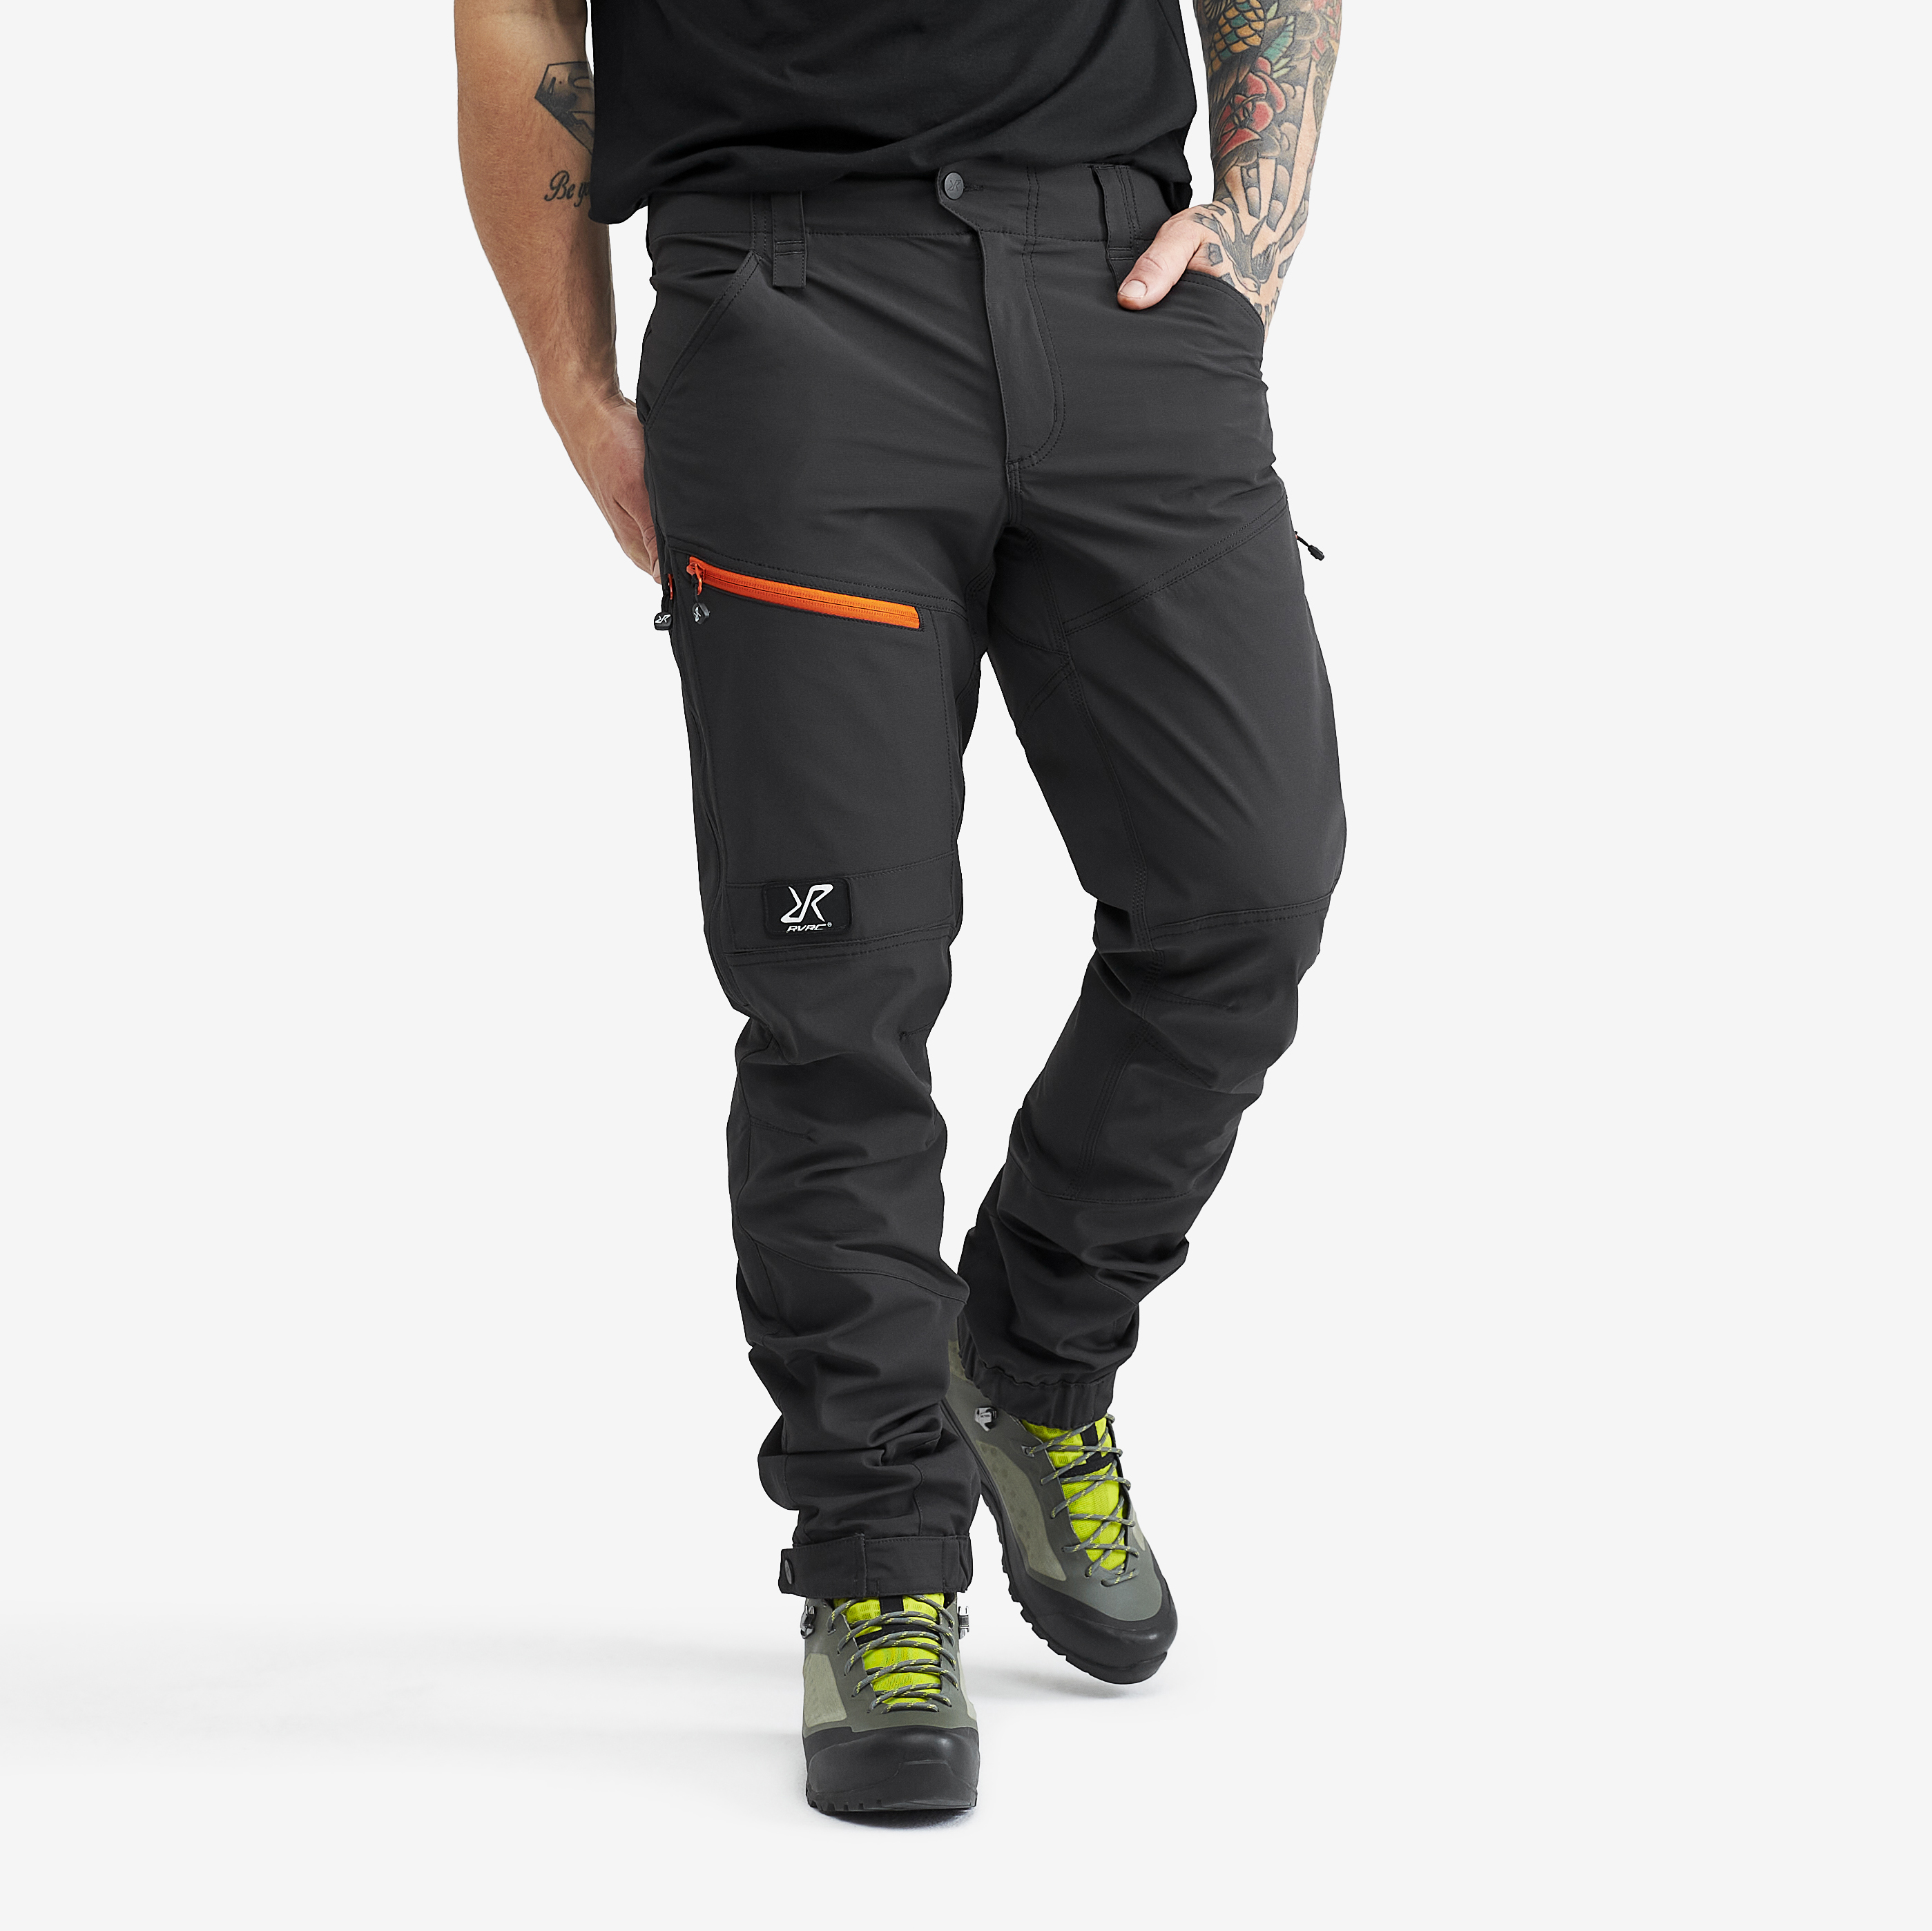 Silence Pants Anthracite Hombres